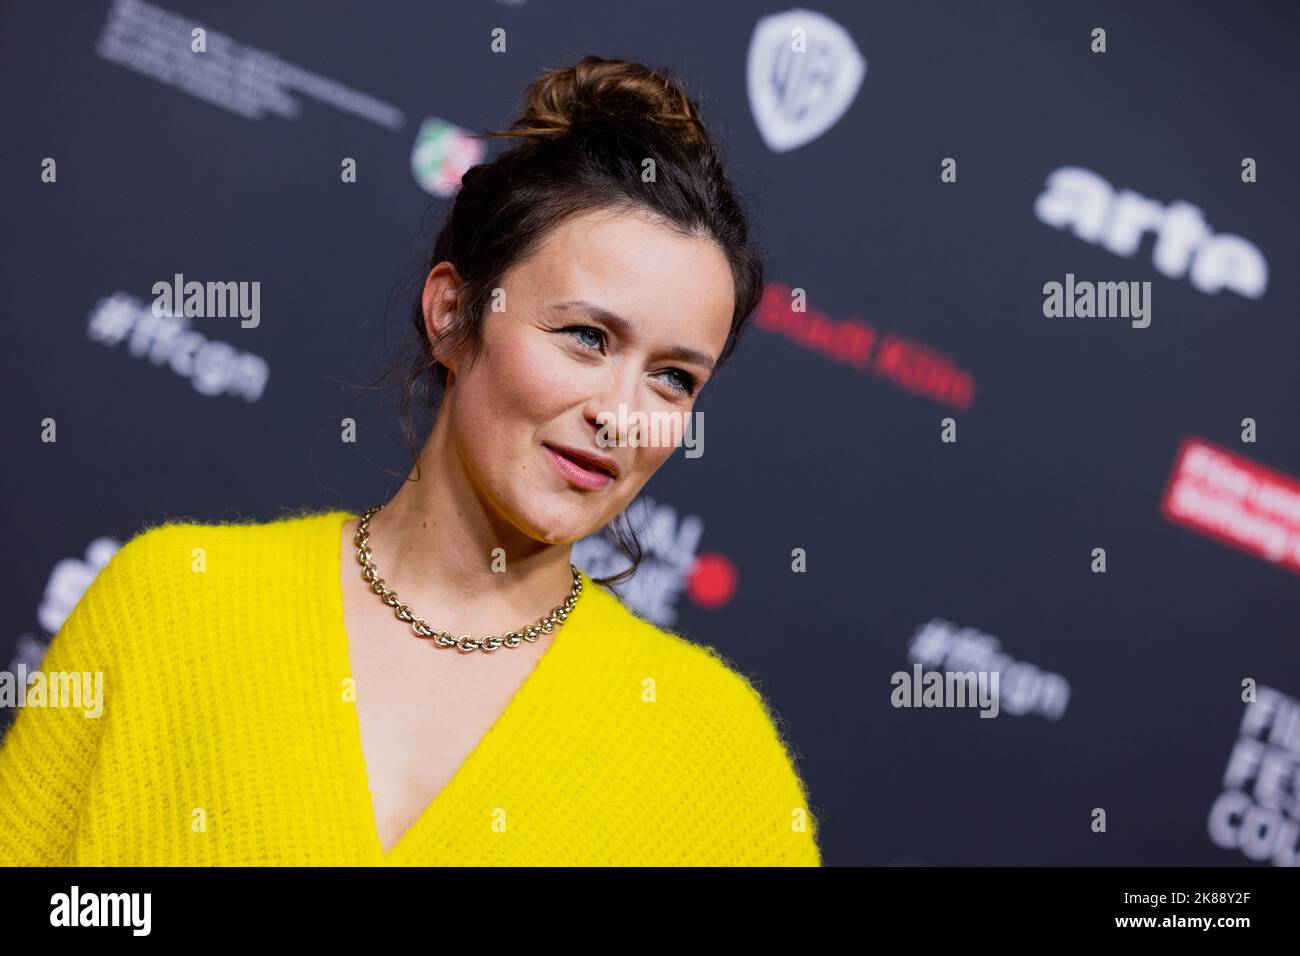 Cologne, Germany. 21st Oct, 2022. Tinka Fürst, actress, arrives at the premiere of the Tatort episode "Spur des Blutes" at Film Festival Cologne. The investigative team of the Cologne Tatort celebrates the 25th anniversary of service. Credit: Rolf Vennenbernd/dpa/Alamy Live News Stock Photo